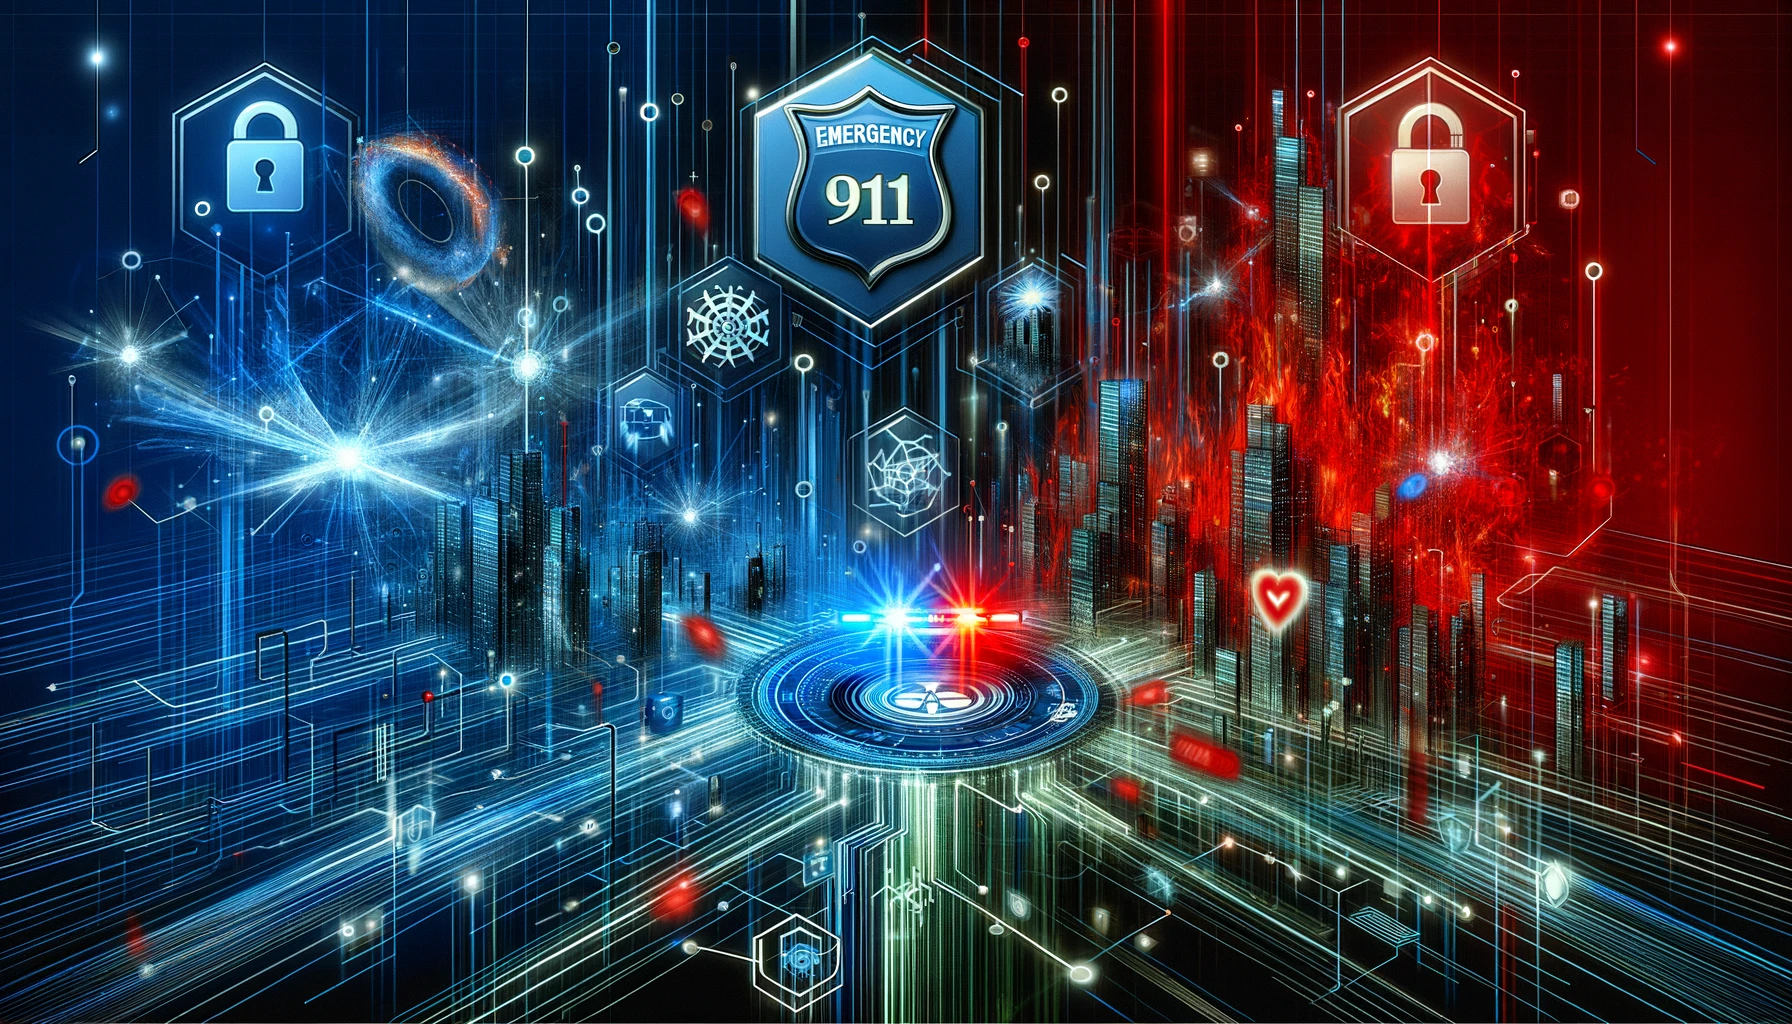 Digital illustration of a 911 emergency system under cyber attack, featuring interconnected nodes, lines of code, and cybersecurity symbols like firewalls and digital locks in blues and reds.